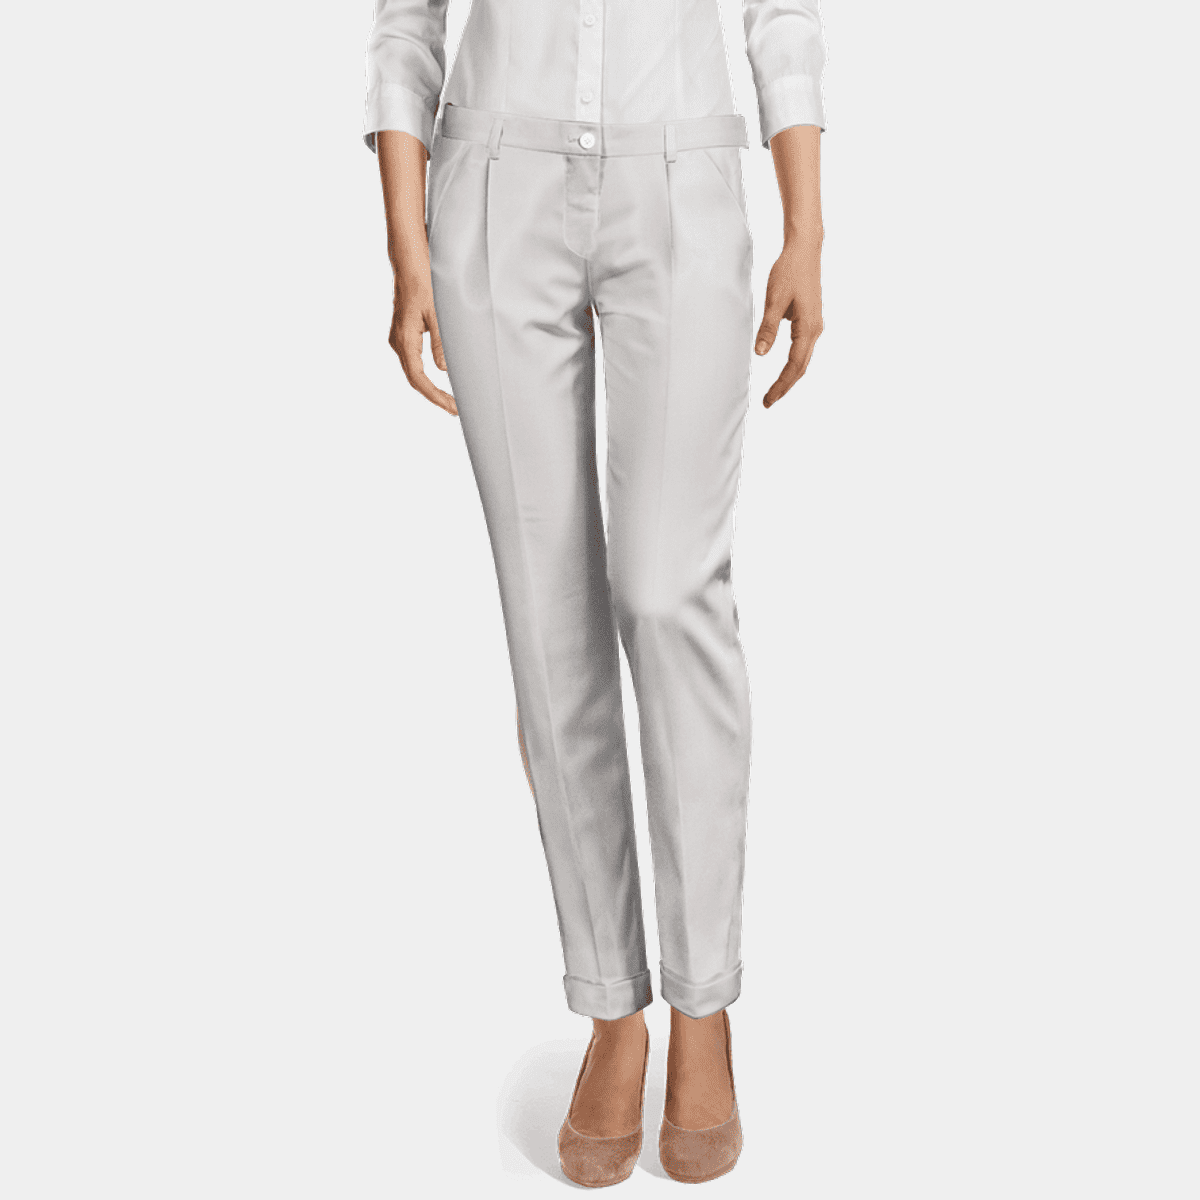 Women's white solid year round Ankle-length Trousers | Sumissura